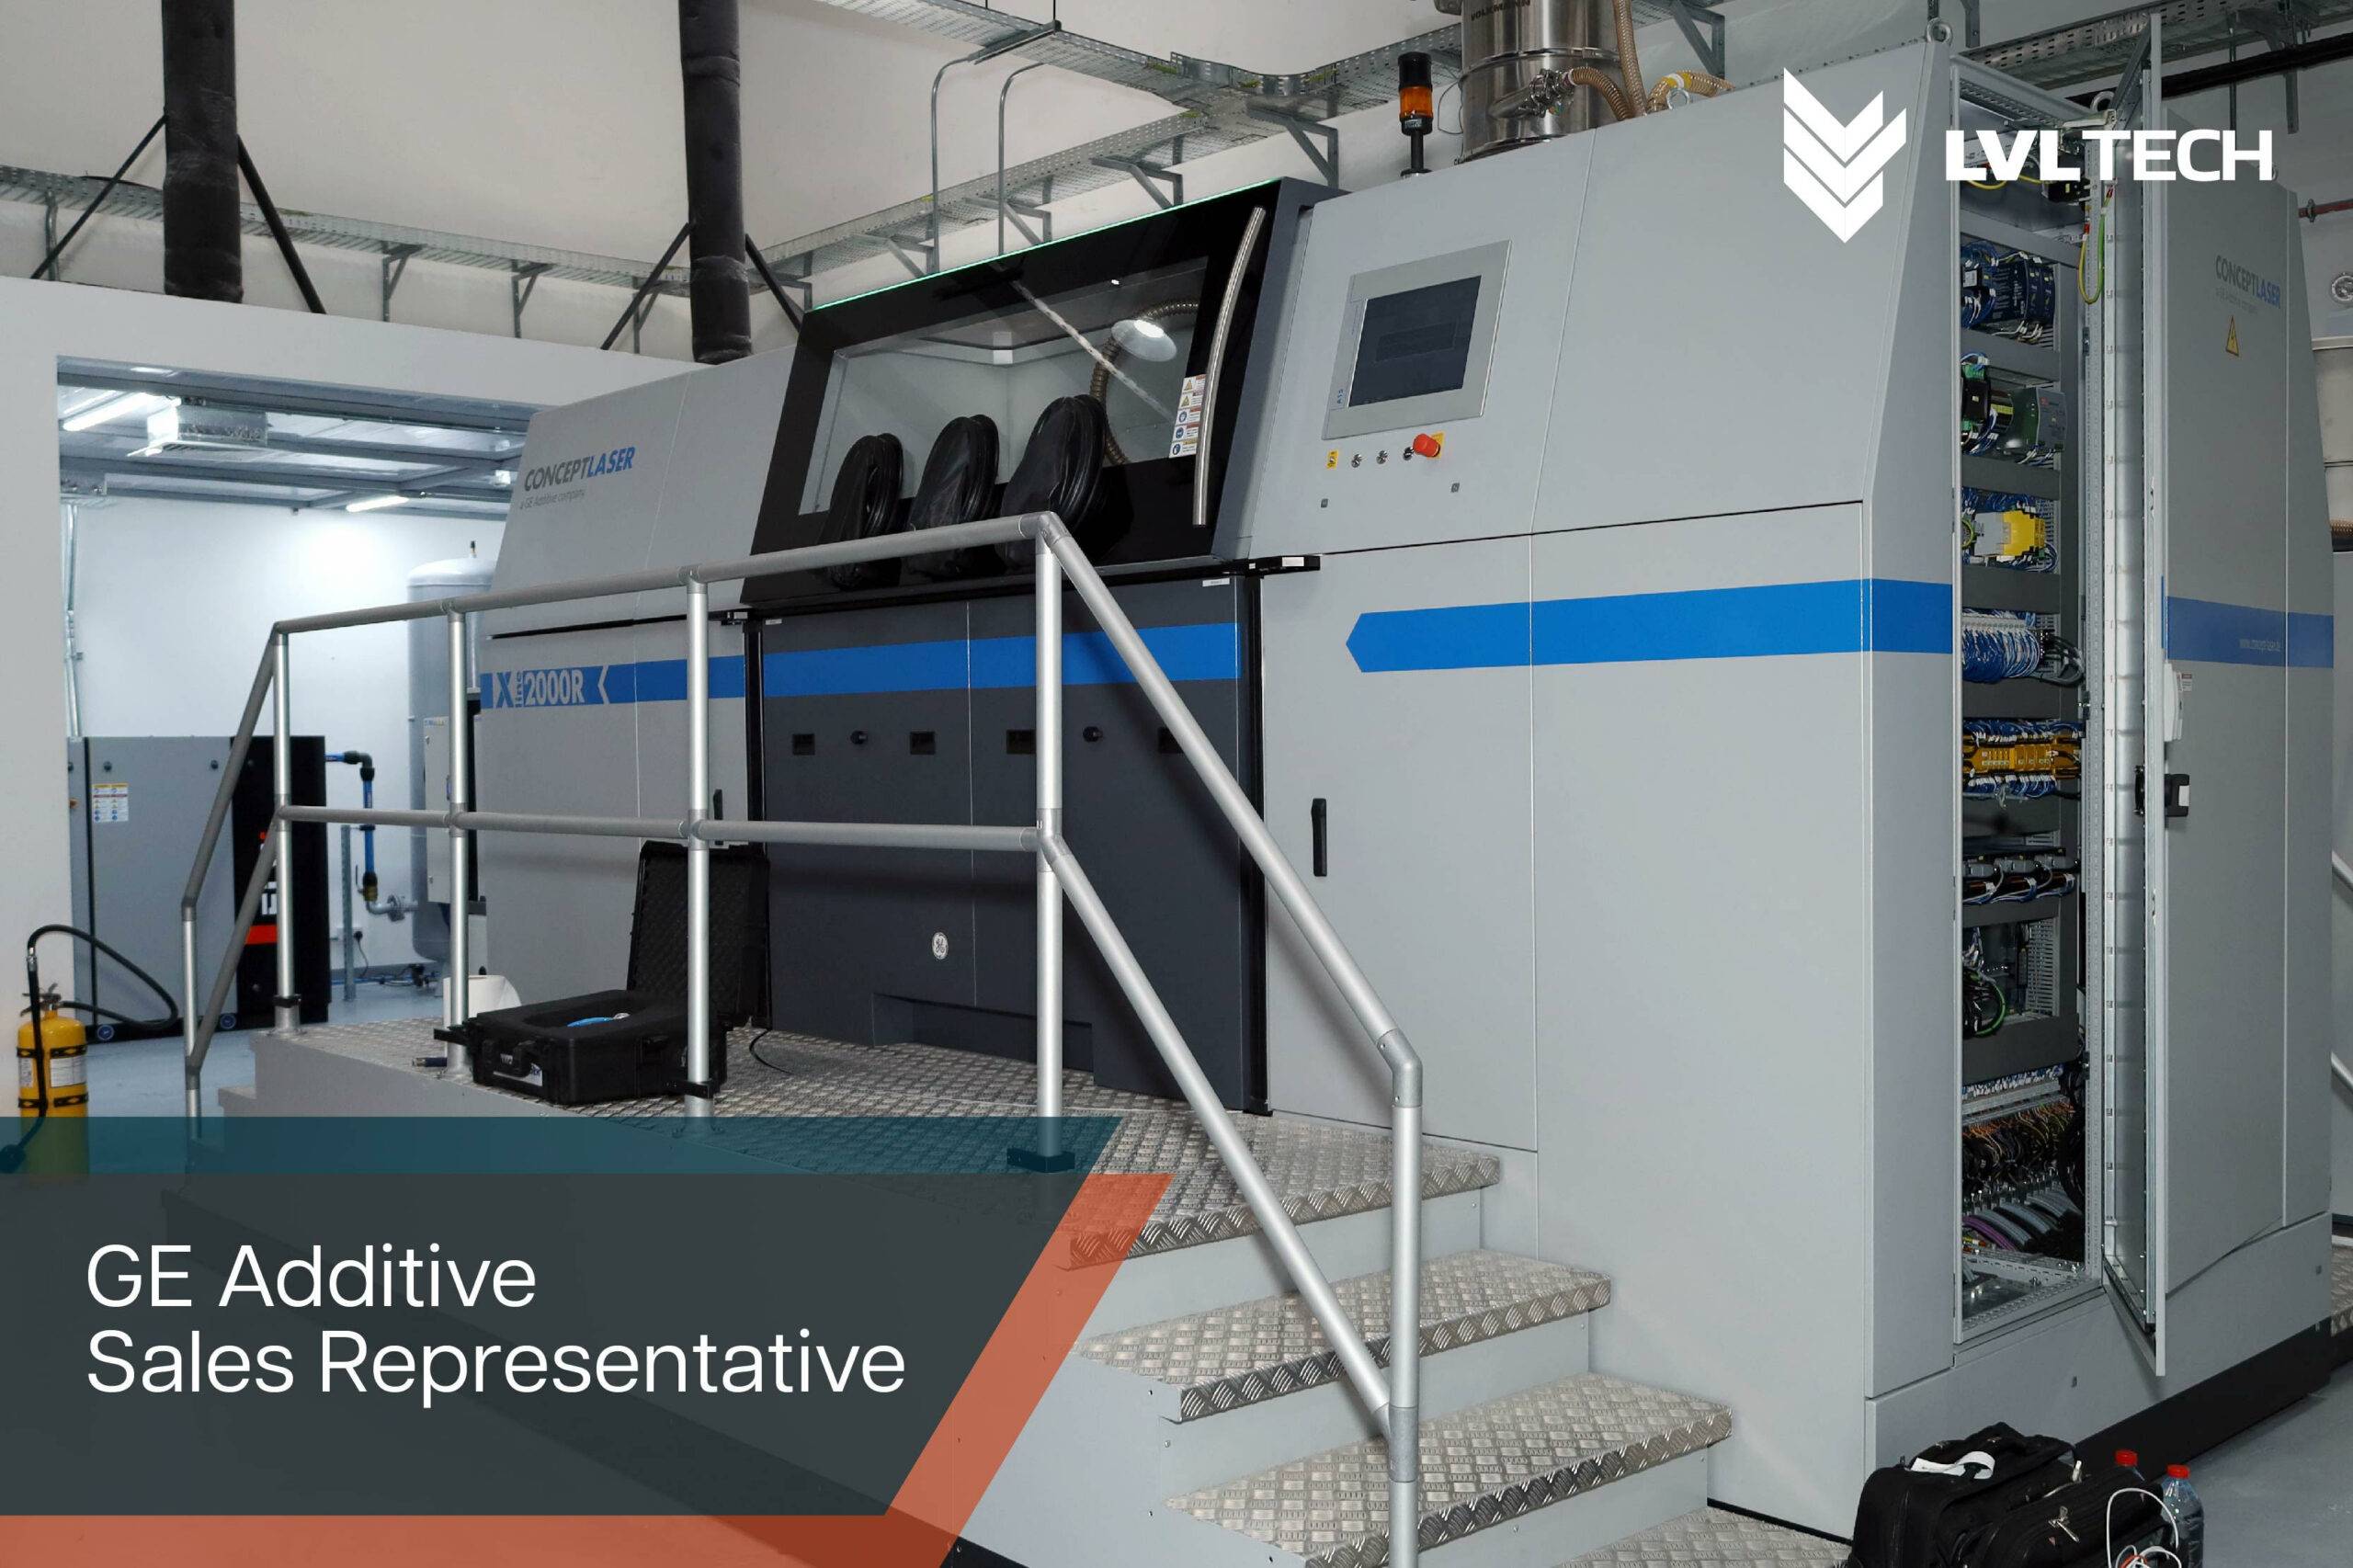 LVLTech Expands Additive Manufacturing Innovation in the Middle East